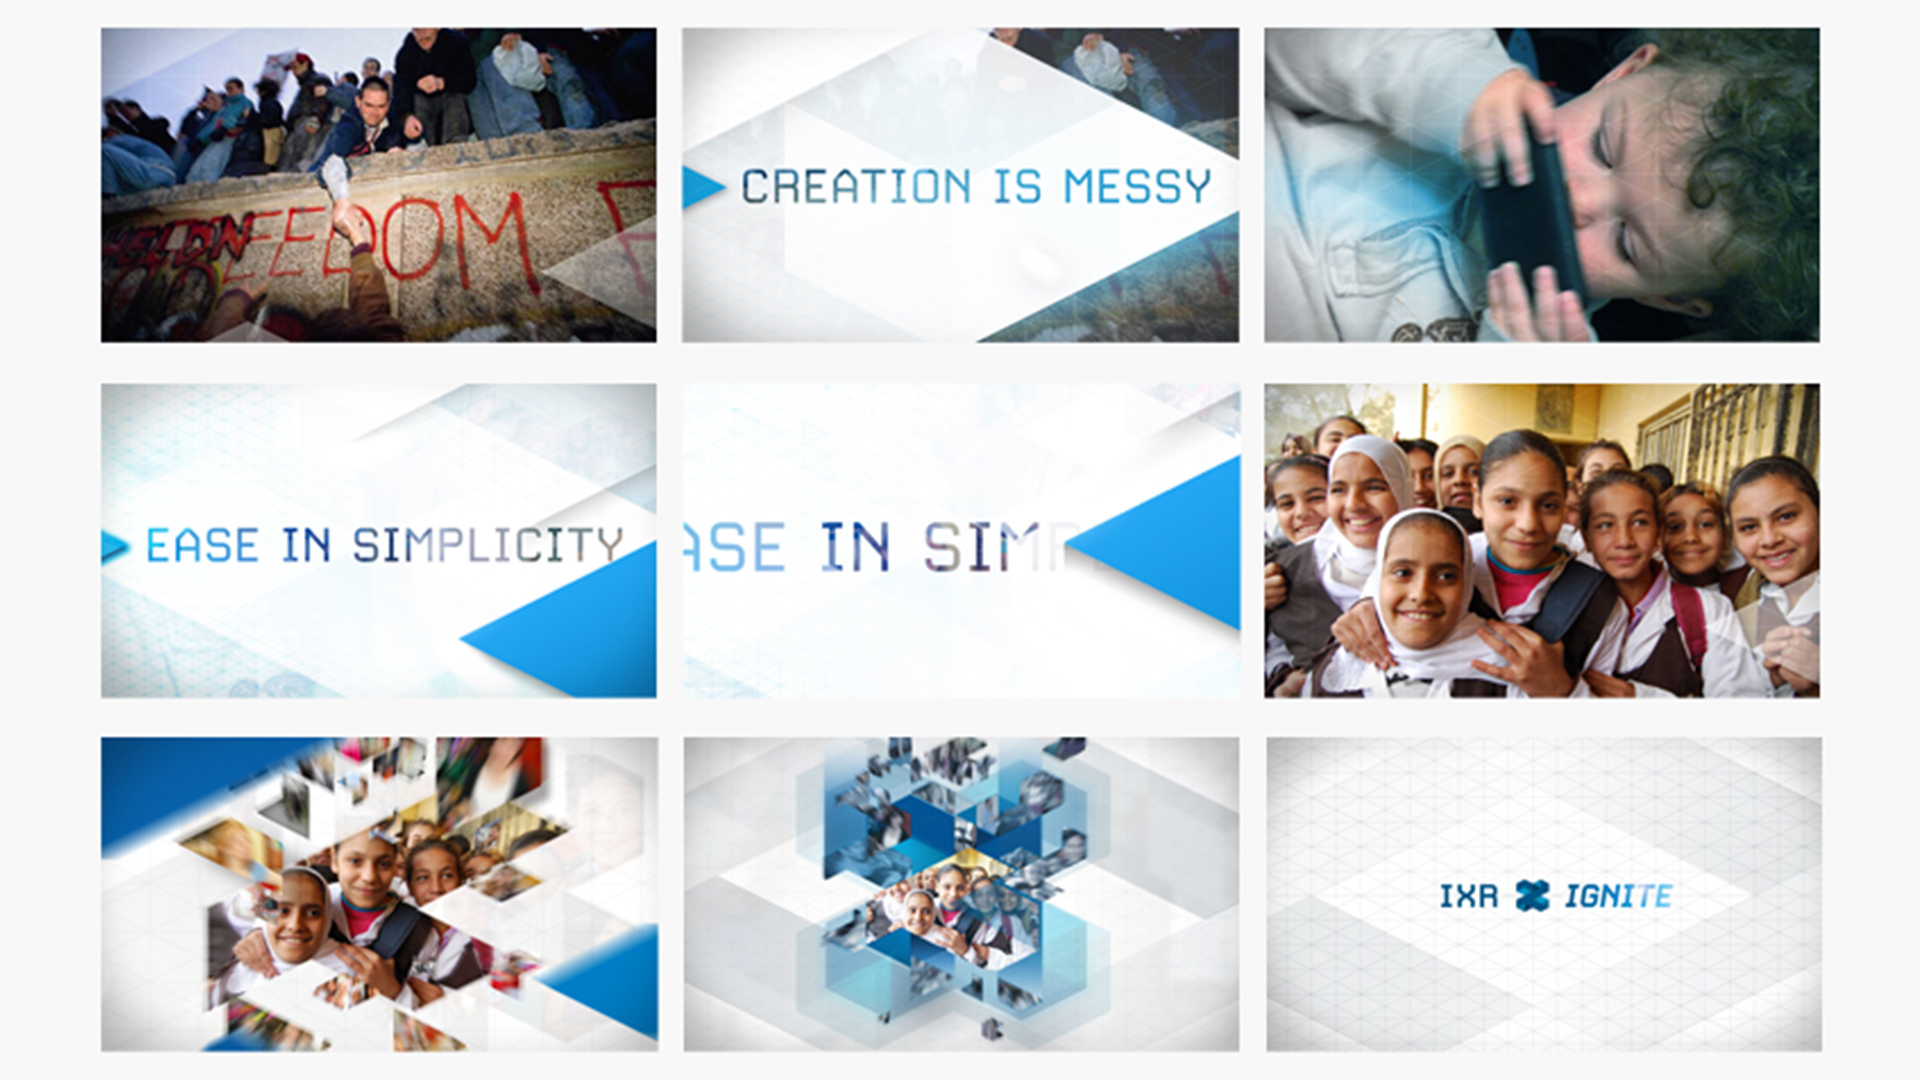 IXR brand video storyboard created by Incubate Design for Intel